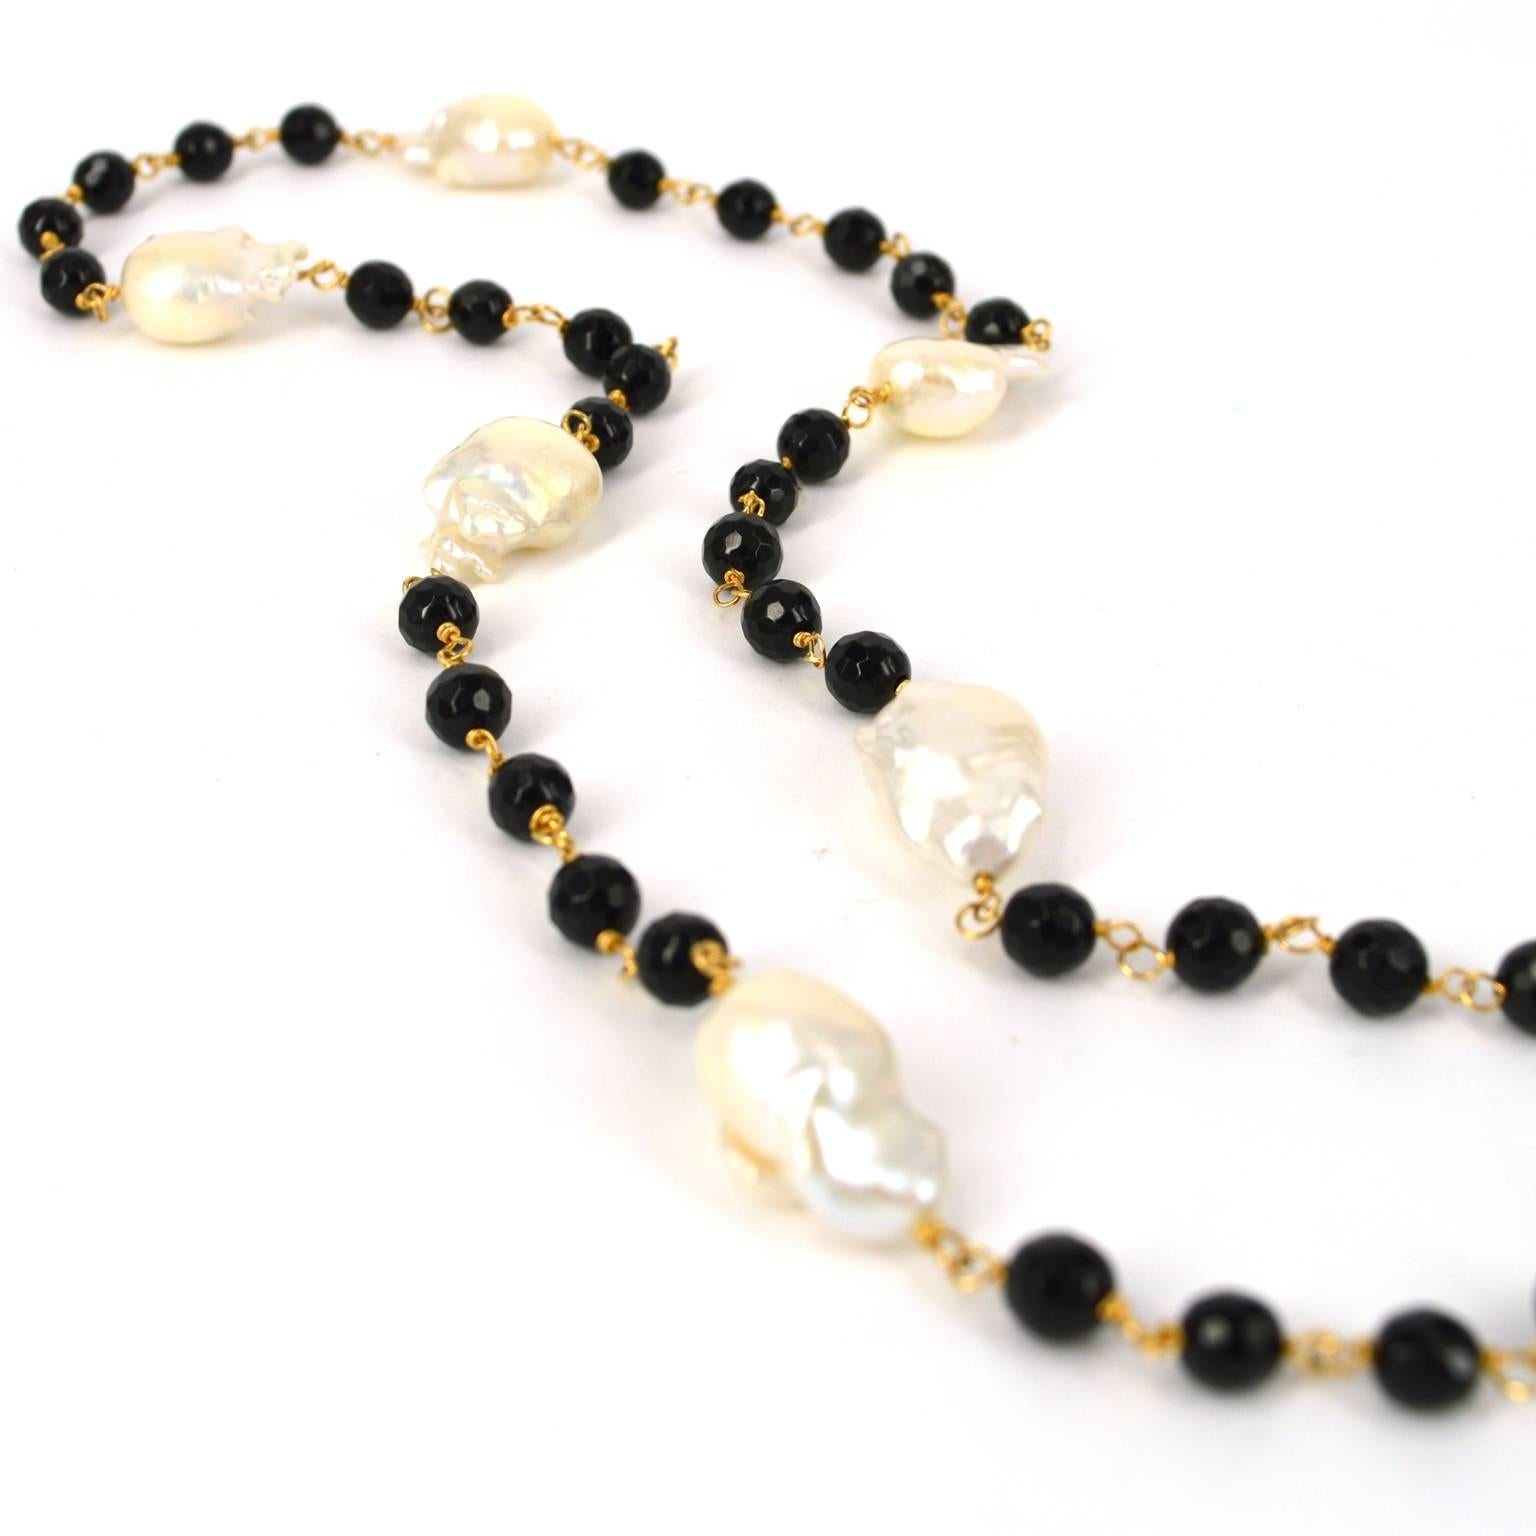 Individually hand wrapped with 14k Gold filled wire this necklace is a continuous strand of 5 x 6mm faceted onyx beads with 11 x 15mm+ Fresh Water Keshi Pearls. If you would like a clasp on this design or additional length please advise. Finished